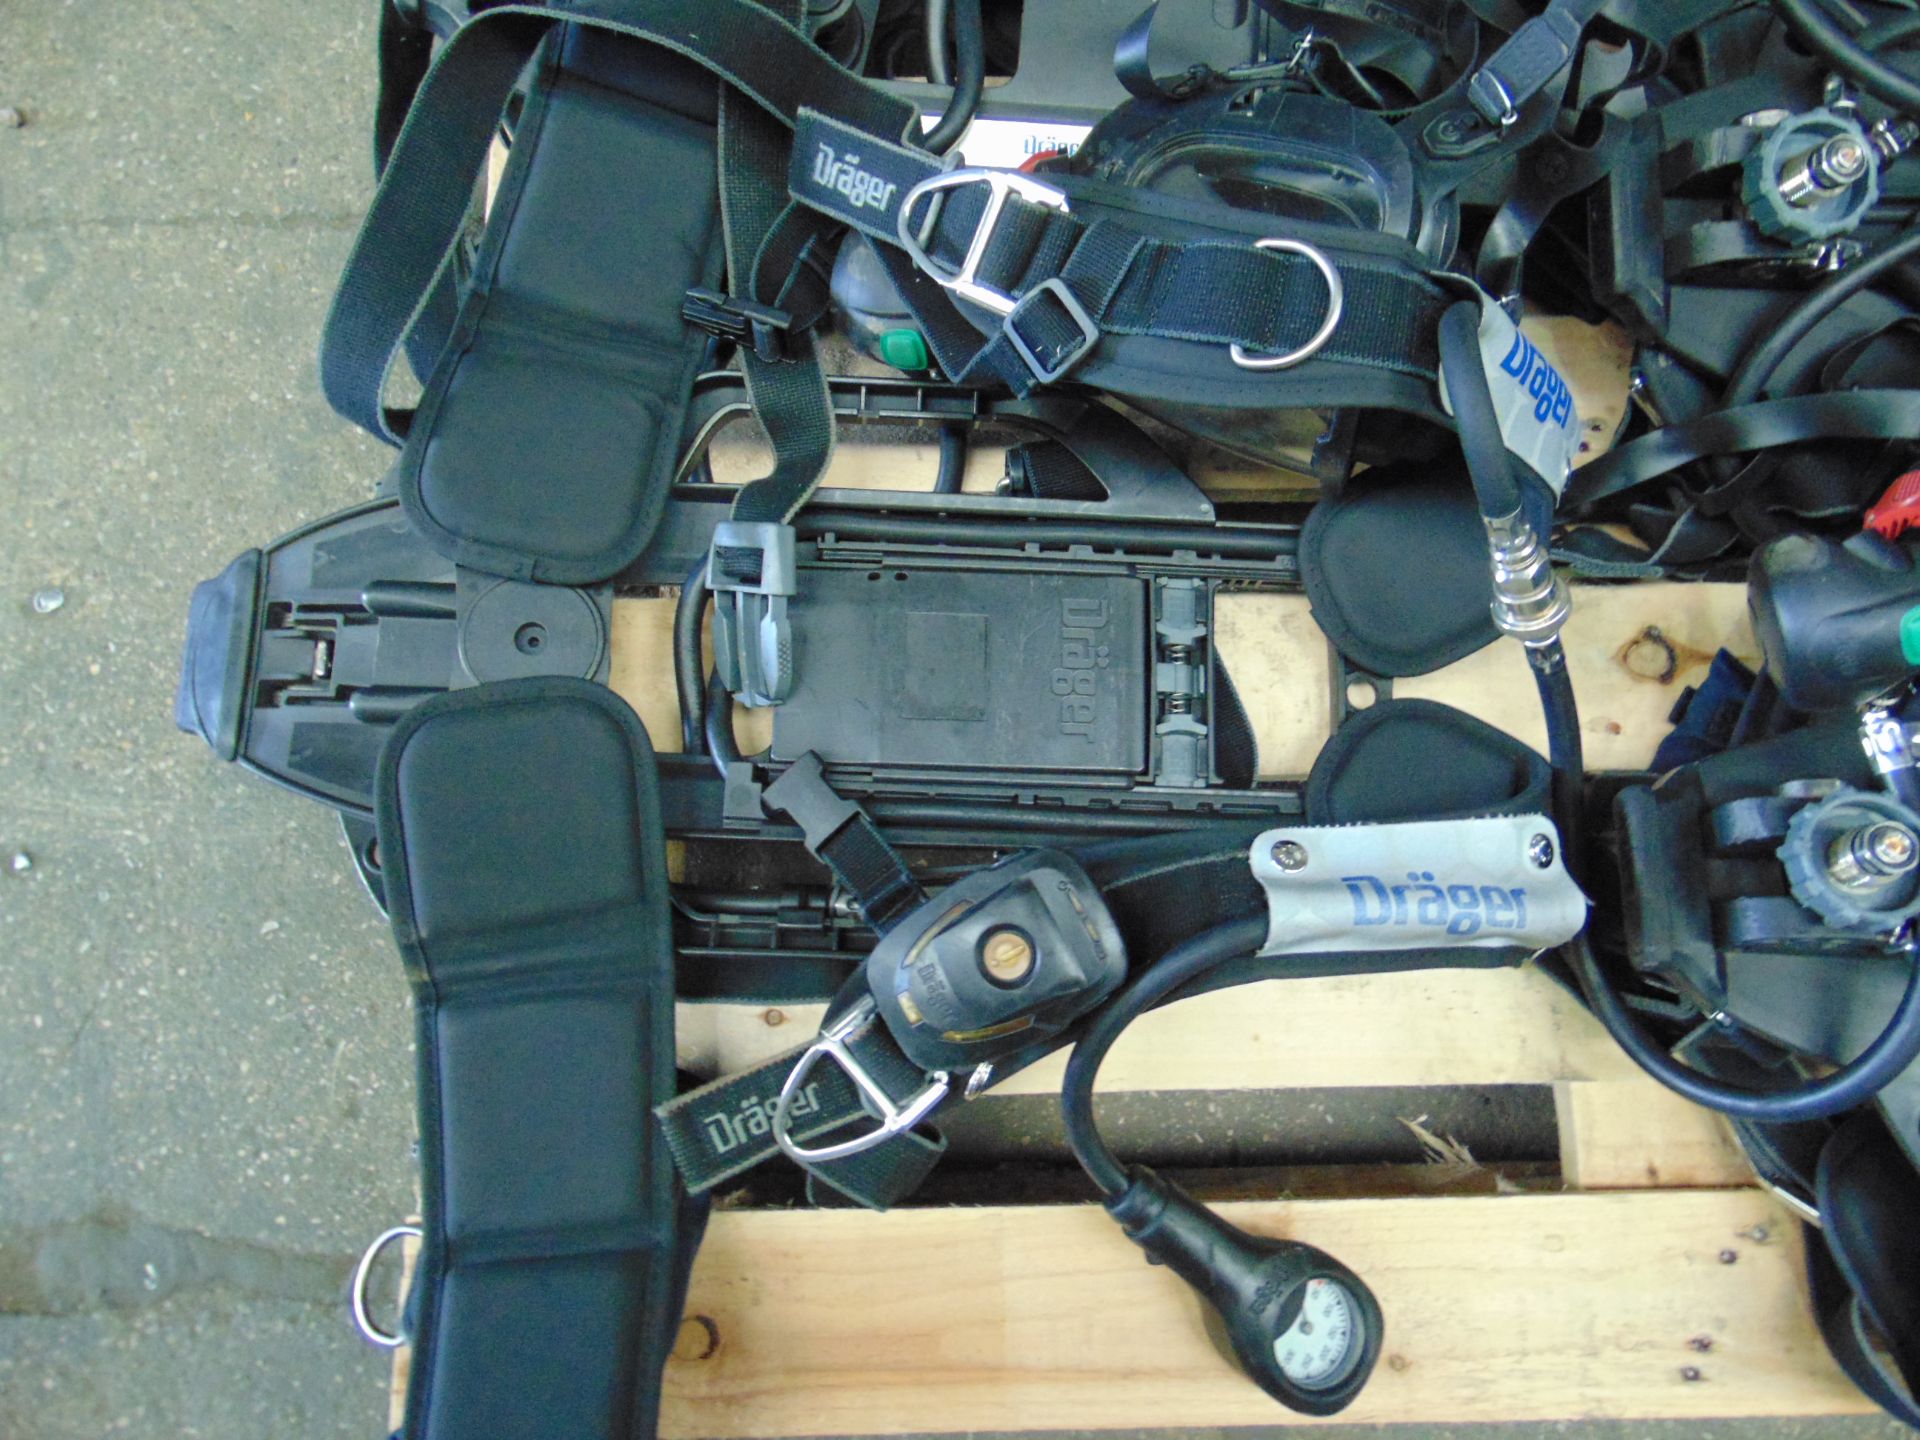 5 x Drager PSS 7000 Self Contained Breathing Apparatus w/ 10 x Drager 300 Bar Air Cylinders - Image 14 of 21